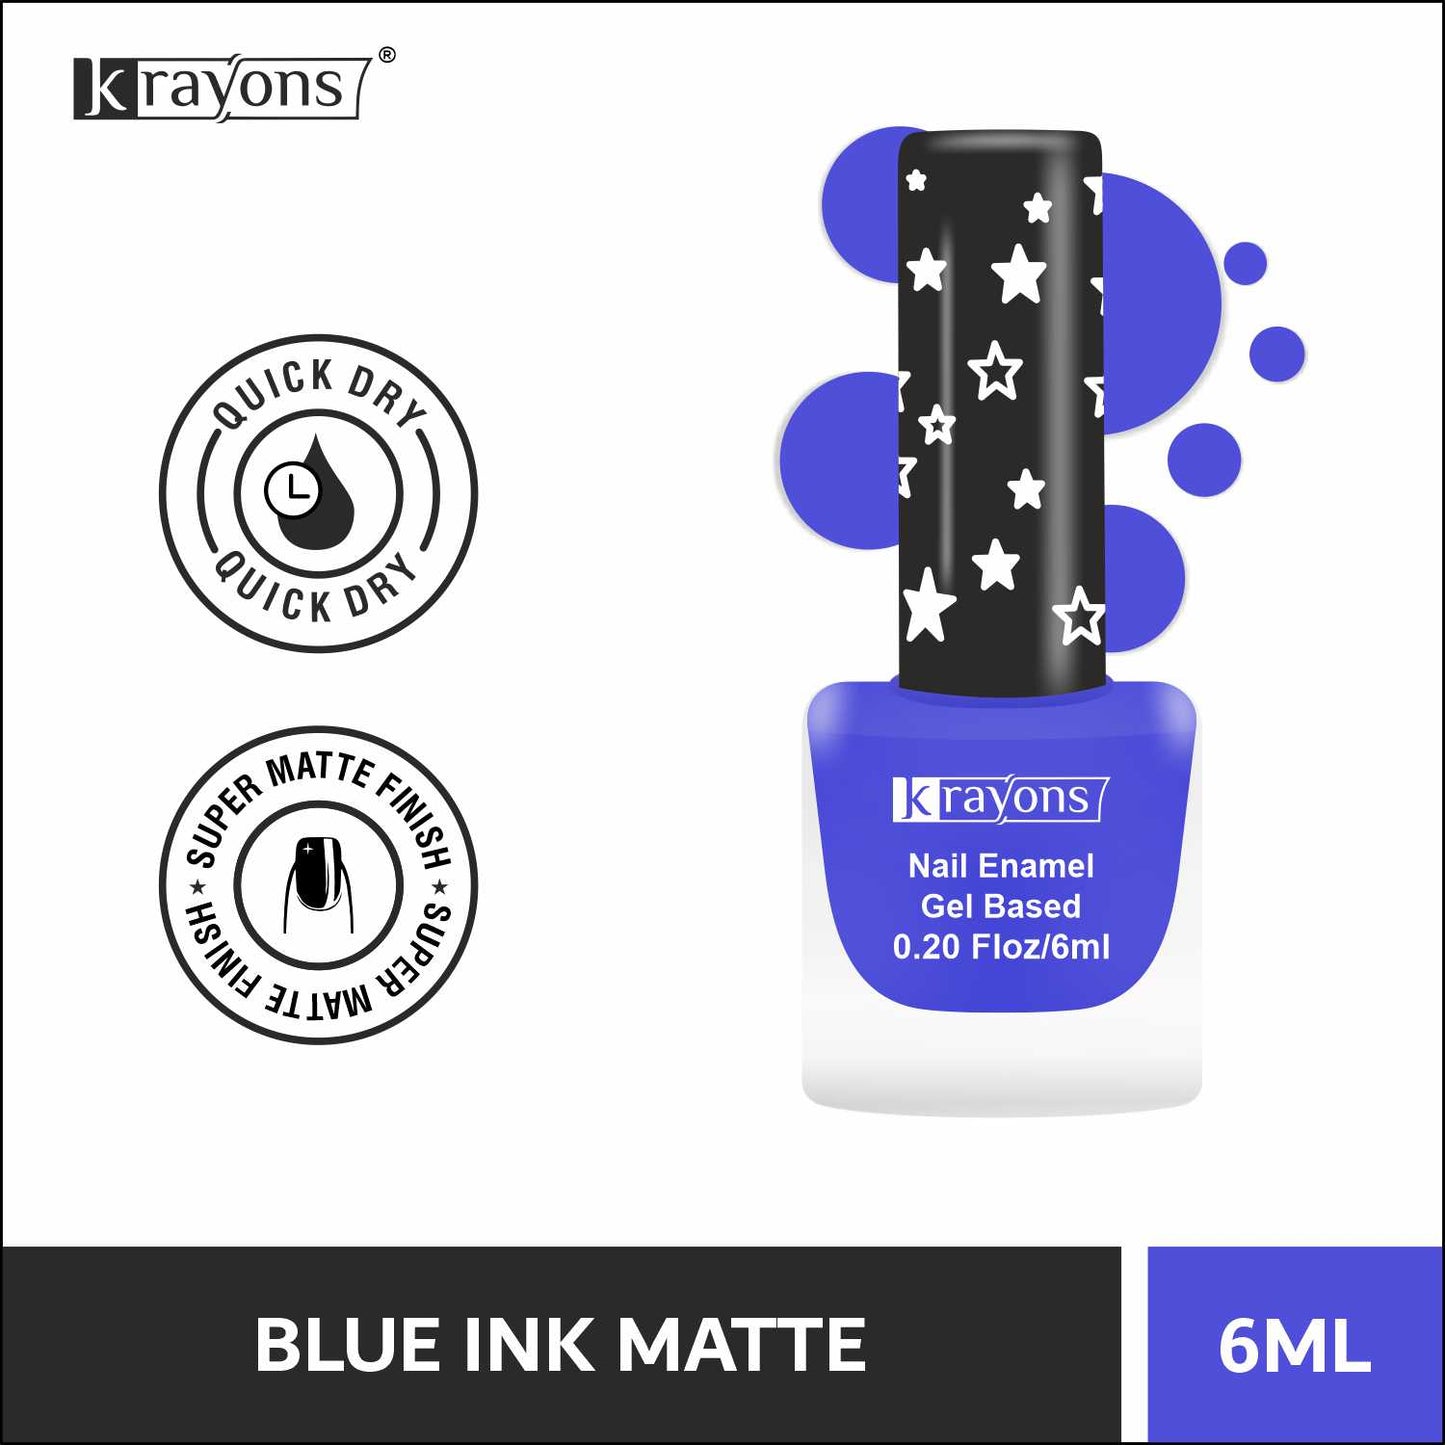 Krayons Cute Super Matte Finish Nail Enamel, Quick Dry, Smooth Finish, LongLasting, Blue Ink, 6ml